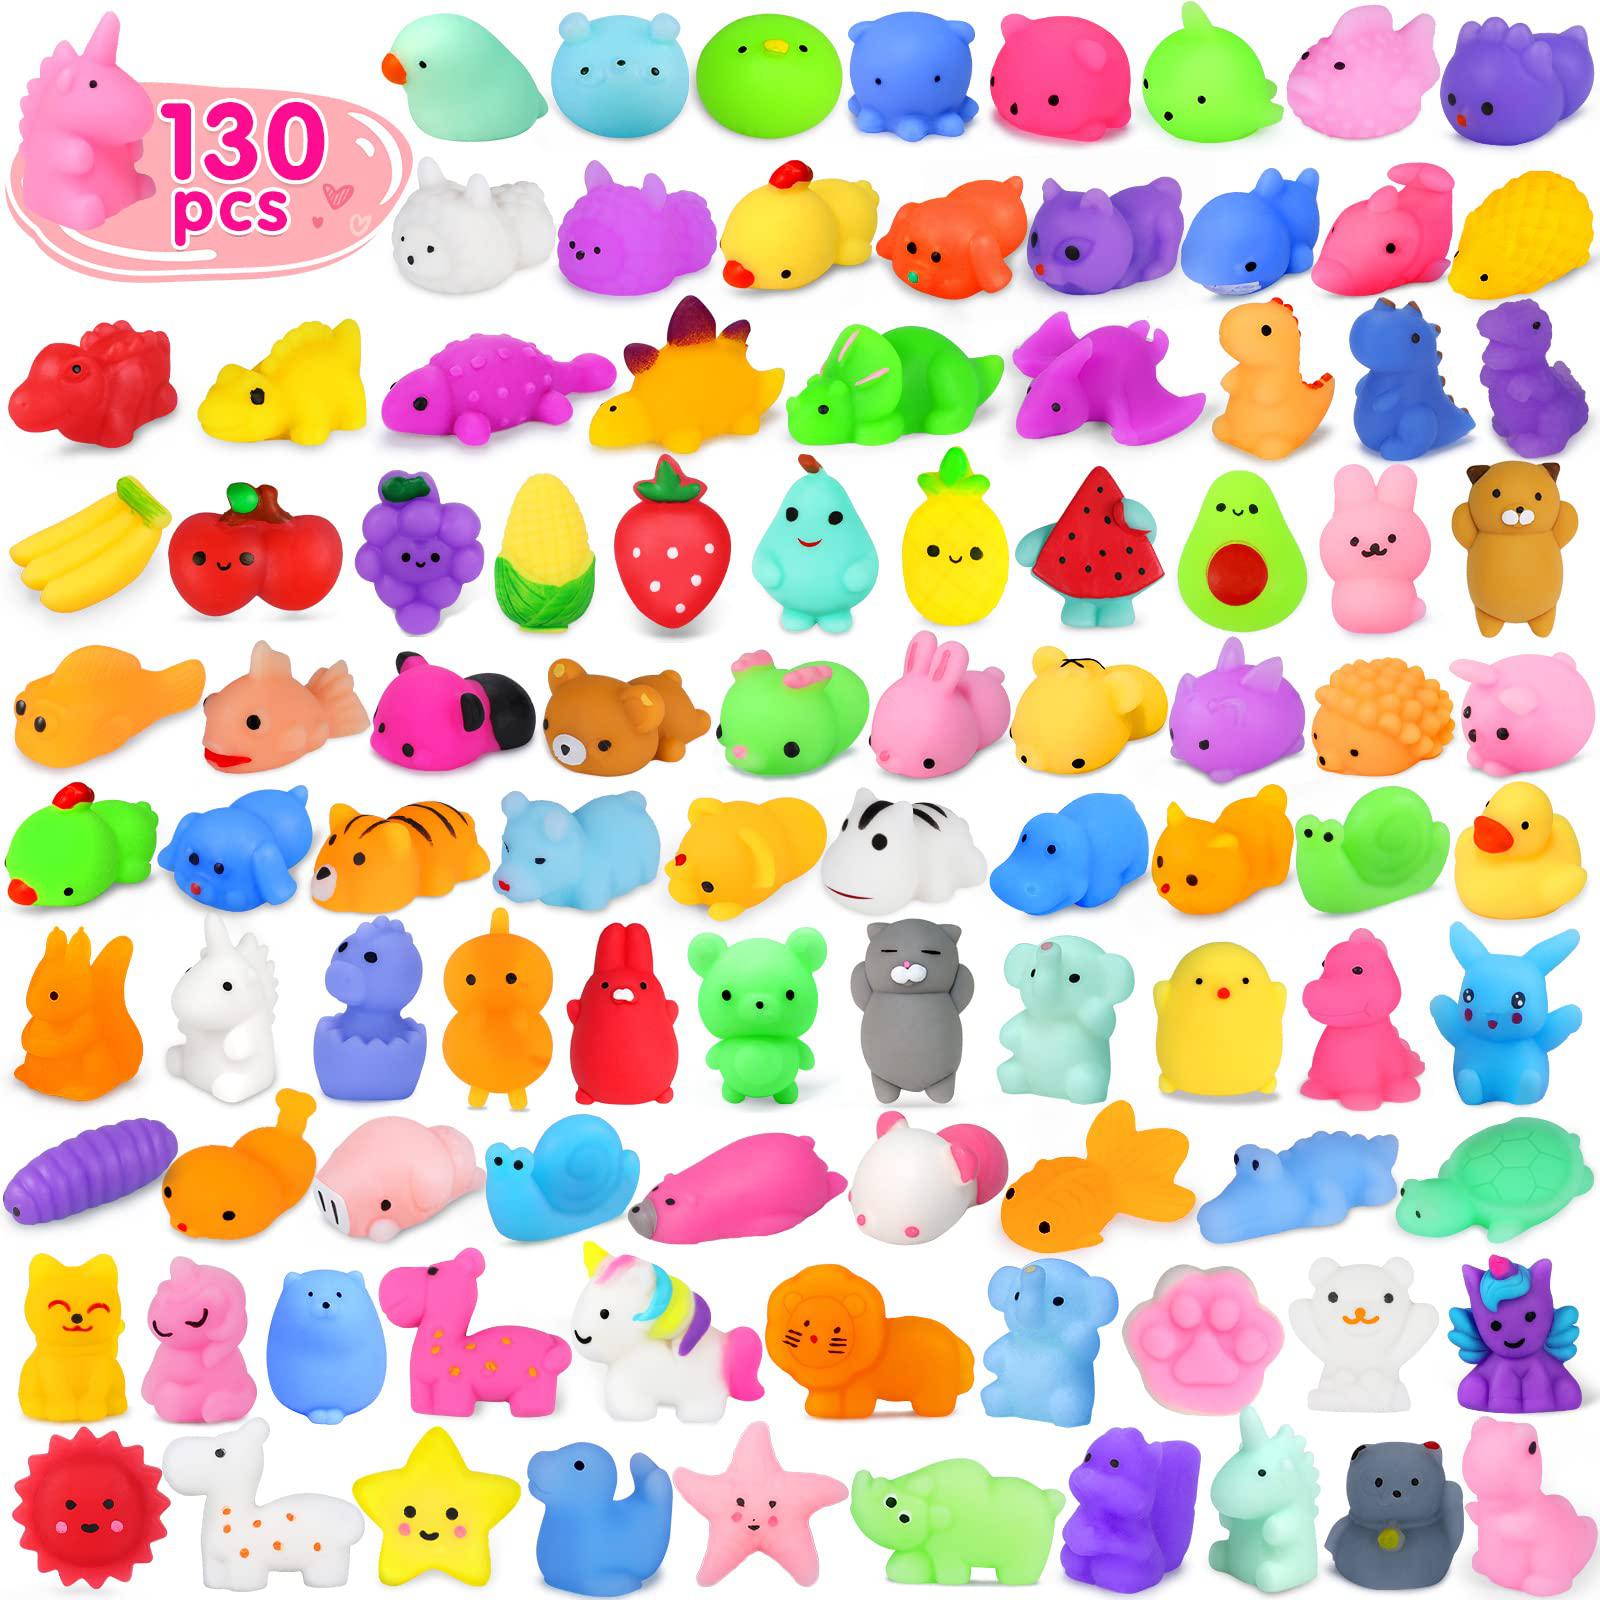 Yunaking 130pcs mochi squishy toy kawaii animals squishies party favors for kids stress relief toy easter egg fillers valentines goodi